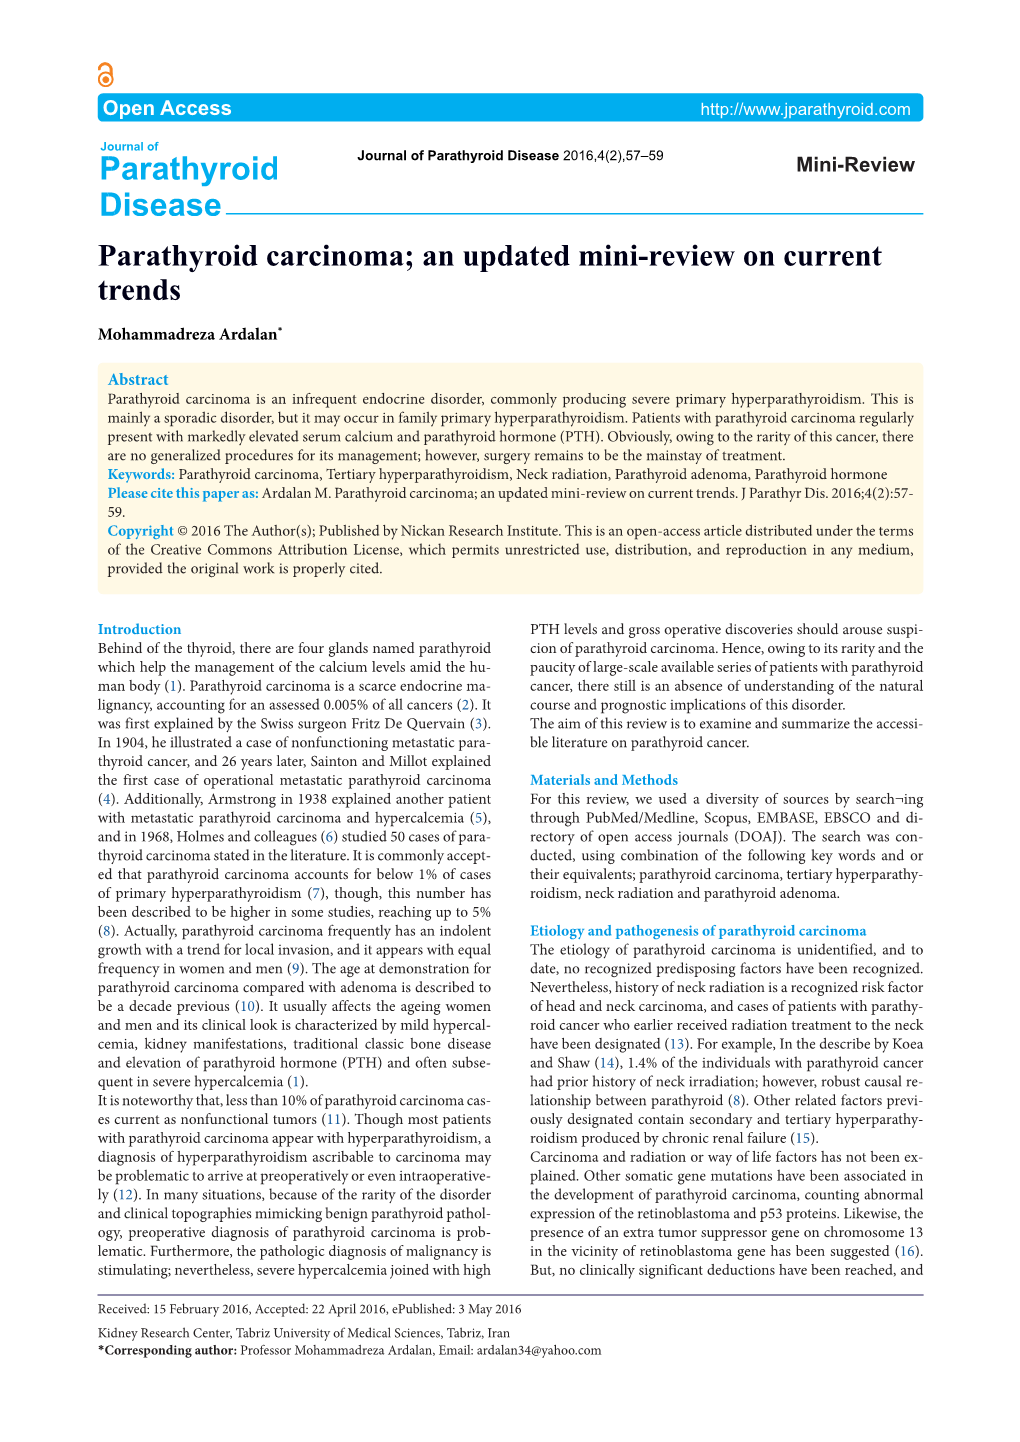 Parathyroid Carcinoma; an Updated Mini-Review on Current Trends